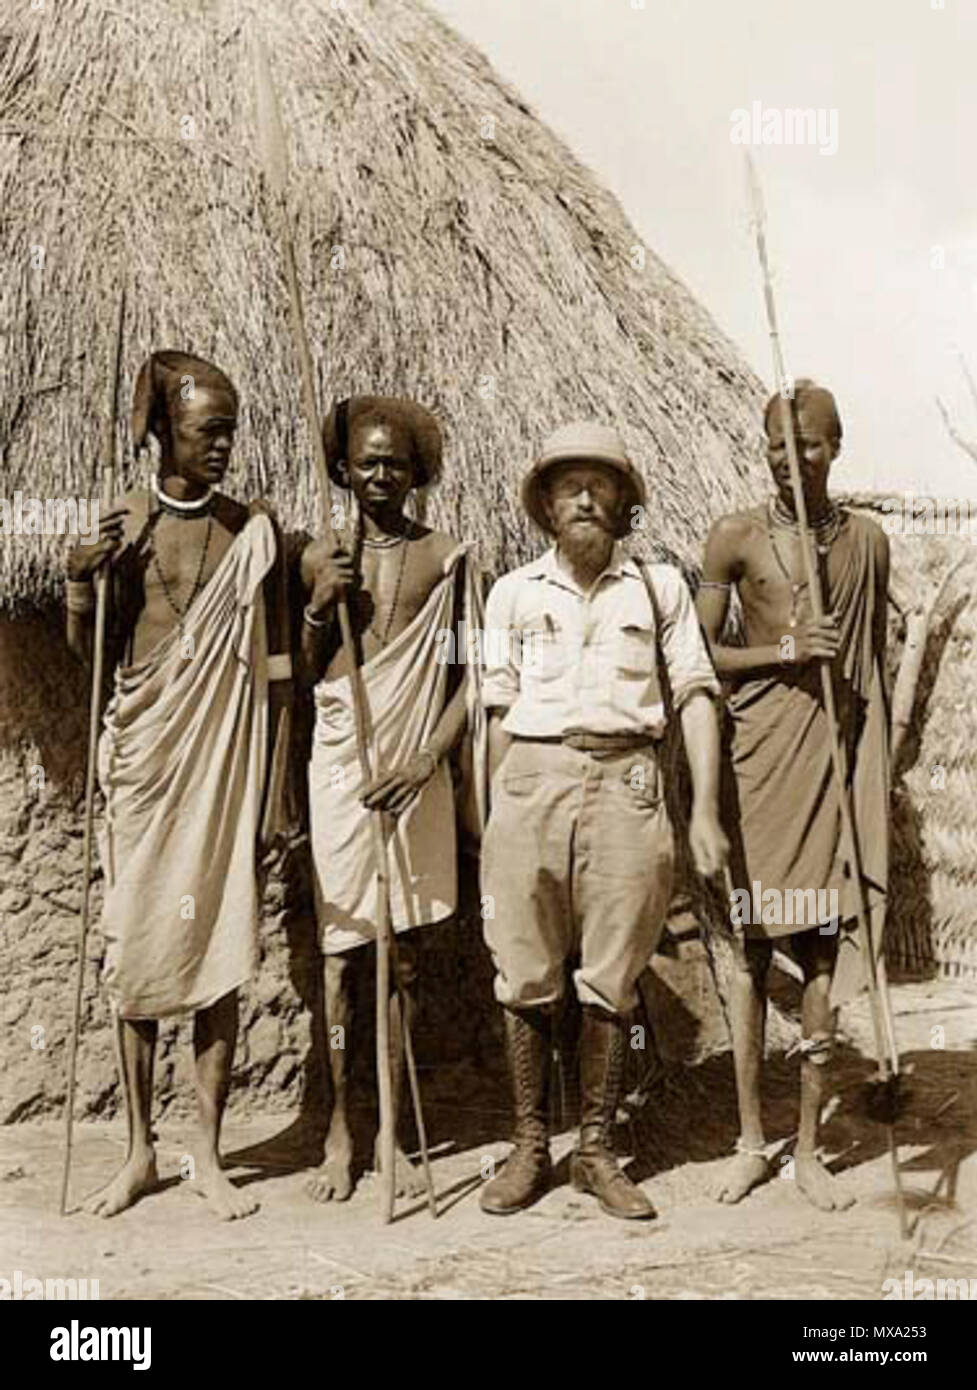 . Kazimierz Nowak among African wariors. The photo probably taken by Kazimierz Nowak (1897-1937, the author is on the photo; taken probably by a self-timer) during his trip through Africa - a Polish traveller, correspondent and photographer. Probably the first man in the world who crossed Africa alone from the North to the South and from the South to the North (from 1931 to 1936; on foot, by bicycle and canoe). circa about 1931-36. probably Kazimierz Nowak or an unknown author 42 Among African wariors Stock Photo